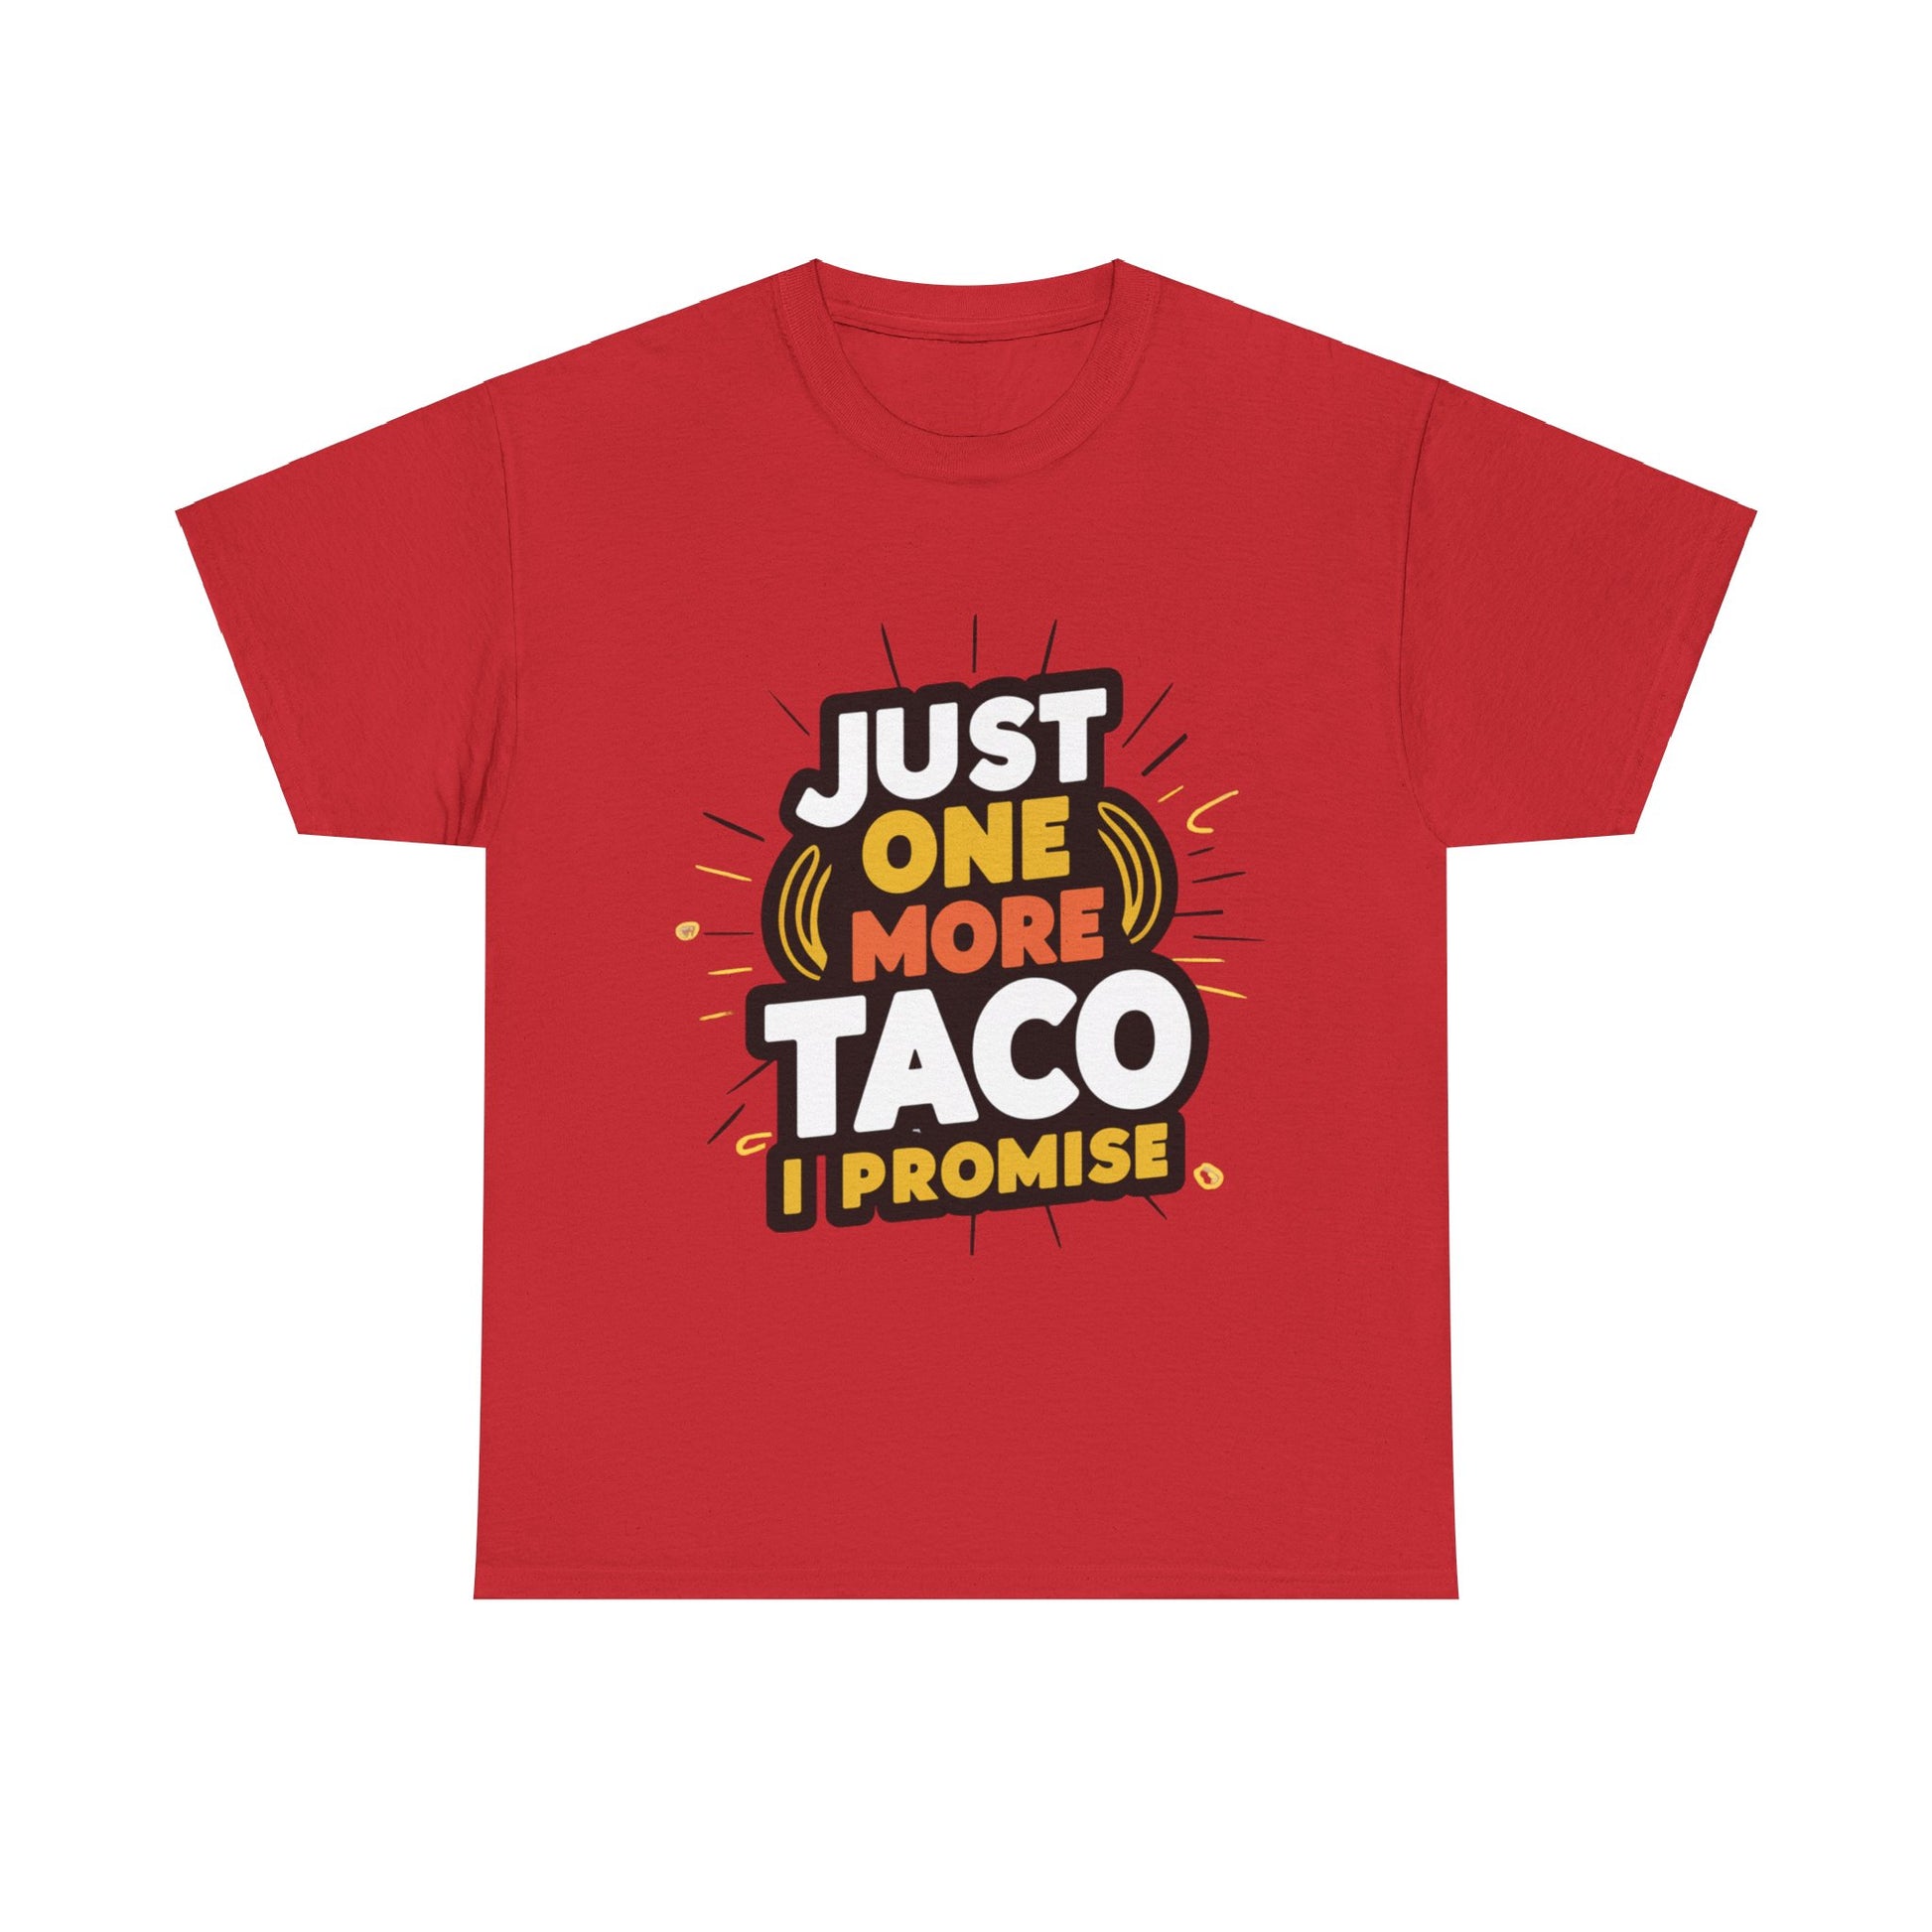 Just One More Taco I Promise Mexican Food Graphic Unisex Heavy Cotton Tee Cotton Funny Humorous Graphic Soft Premium Unisex Men Women Red T-shirt Birthday Gift-7